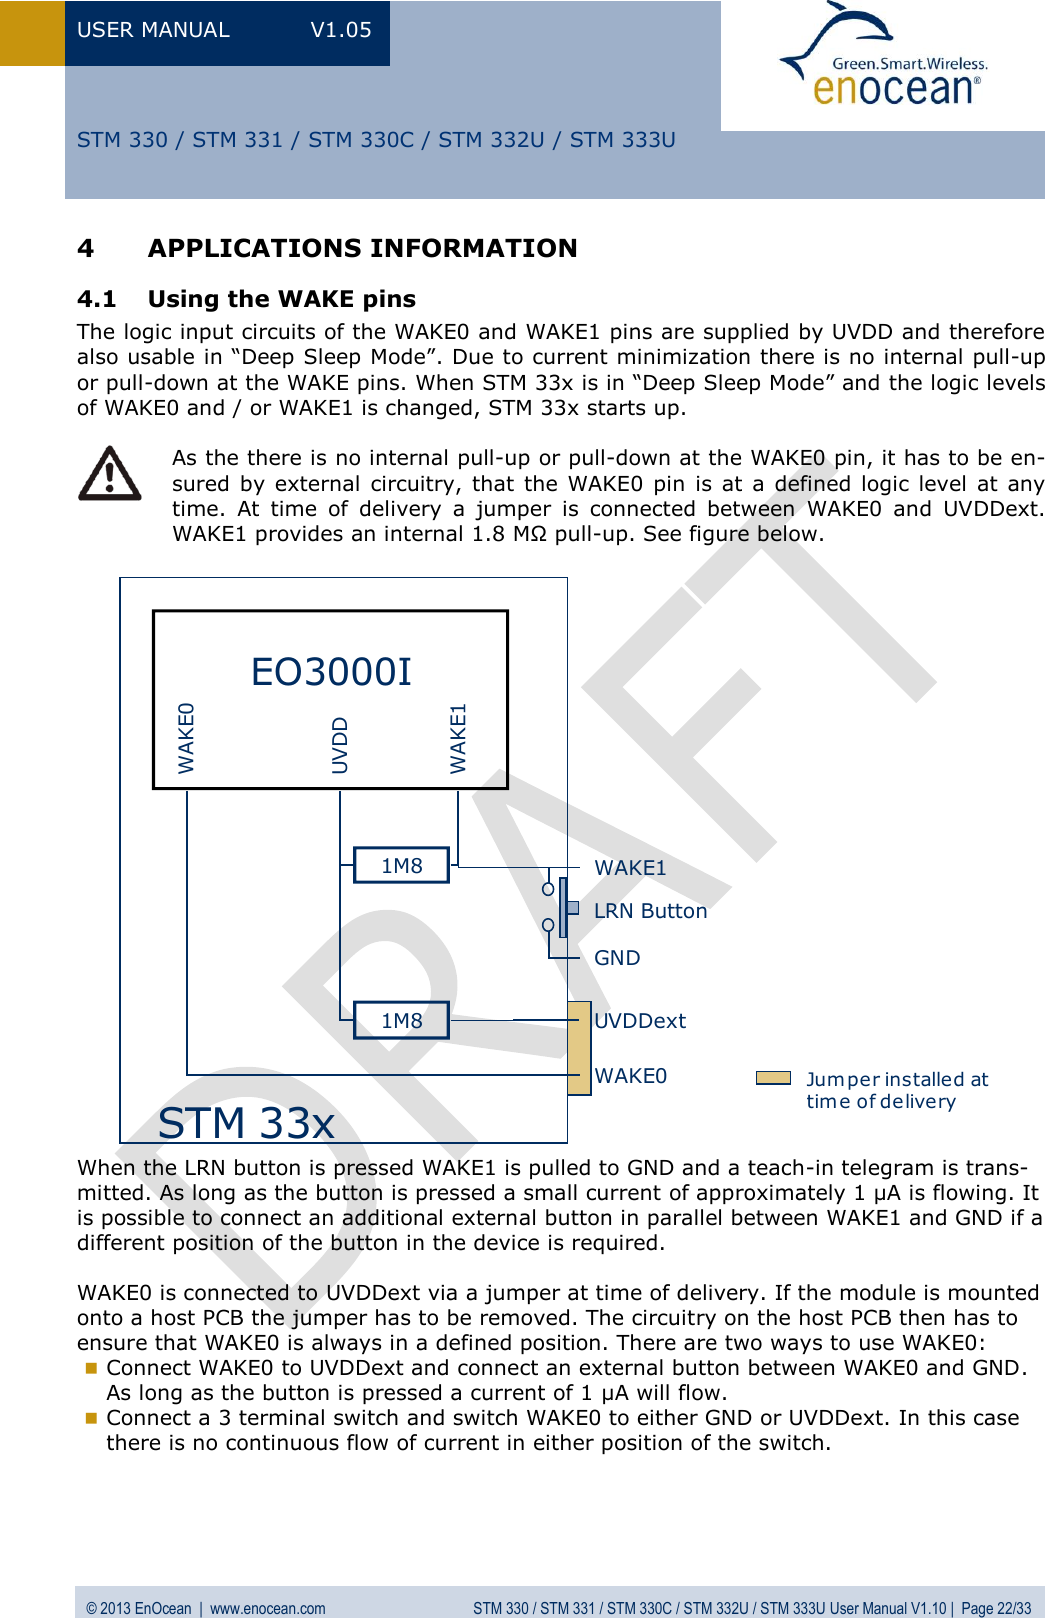 USER MANUAL  V1.05  © 2013 EnOcean  |  www.enocean.com  STM 330 / STM 331 / STM 330C / STM 332U / STM 333U User Manual V1.10 |  Page 22/33   STM 330 / STM 331 / STM 330C / STM 332U / STM 333U 4 APPLICATIONS INFORMATION 4.1 Using the WAKE pins  The logic input circuits of the WAKE0 and WAKE1 pins are supplied by UVDD and therefore also usable in “Deep Sleep Mode”. Due to current minimization there is no internal pull-up or pull-down at the WAKE pins. When STM 33x is in “Deep Sleep Mode” and the logic levels of WAKE0 and / or WAKE1 is changed, STM 33x starts up.   As the there is no internal pull-up or pull-down at the WAKE0 pin, it has to be en-sured by external  circuitry, that the  WAKE0  pin  is at  a defined logic level  at  any time.  At  time  of  delivery  a  jumper  is  connected  between  WAKE0  and  UVDDext. WAKE1 provides an internal 1.8 MΩ pull-up. See figure below. EO3000IWAKE0WAKE1UVDDUVDDextSTM 33xWAKE1WAKE0GND1M81M8LRN ButtonJum per installed at time of delivery When the LRN button is pressed WAKE1 is pulled to GND and a teach-in telegram is trans-mitted. As long as the button is pressed a small current of approximately 1 µA is flowing. It is possible to connect an additional external button in parallel between WAKE1 and GND if a different position of the button in the device is required.  WAKE0 is connected to UVDDext via a jumper at time of delivery. If the module is mounted onto a host PCB the jumper has to be removed. The circuitry on the host PCB then has to ensure that WAKE0 is always in a defined position. There are two ways to use WAKE0:   Connect WAKE0 to UVDDext and connect an external button between WAKE0 and GND. As long as the button is pressed a current of 1 µA will flow.  Connect a 3 terminal switch and switch WAKE0 to either GND or UVDDext. In this case there is no continuous flow of current in either position of the switch.     